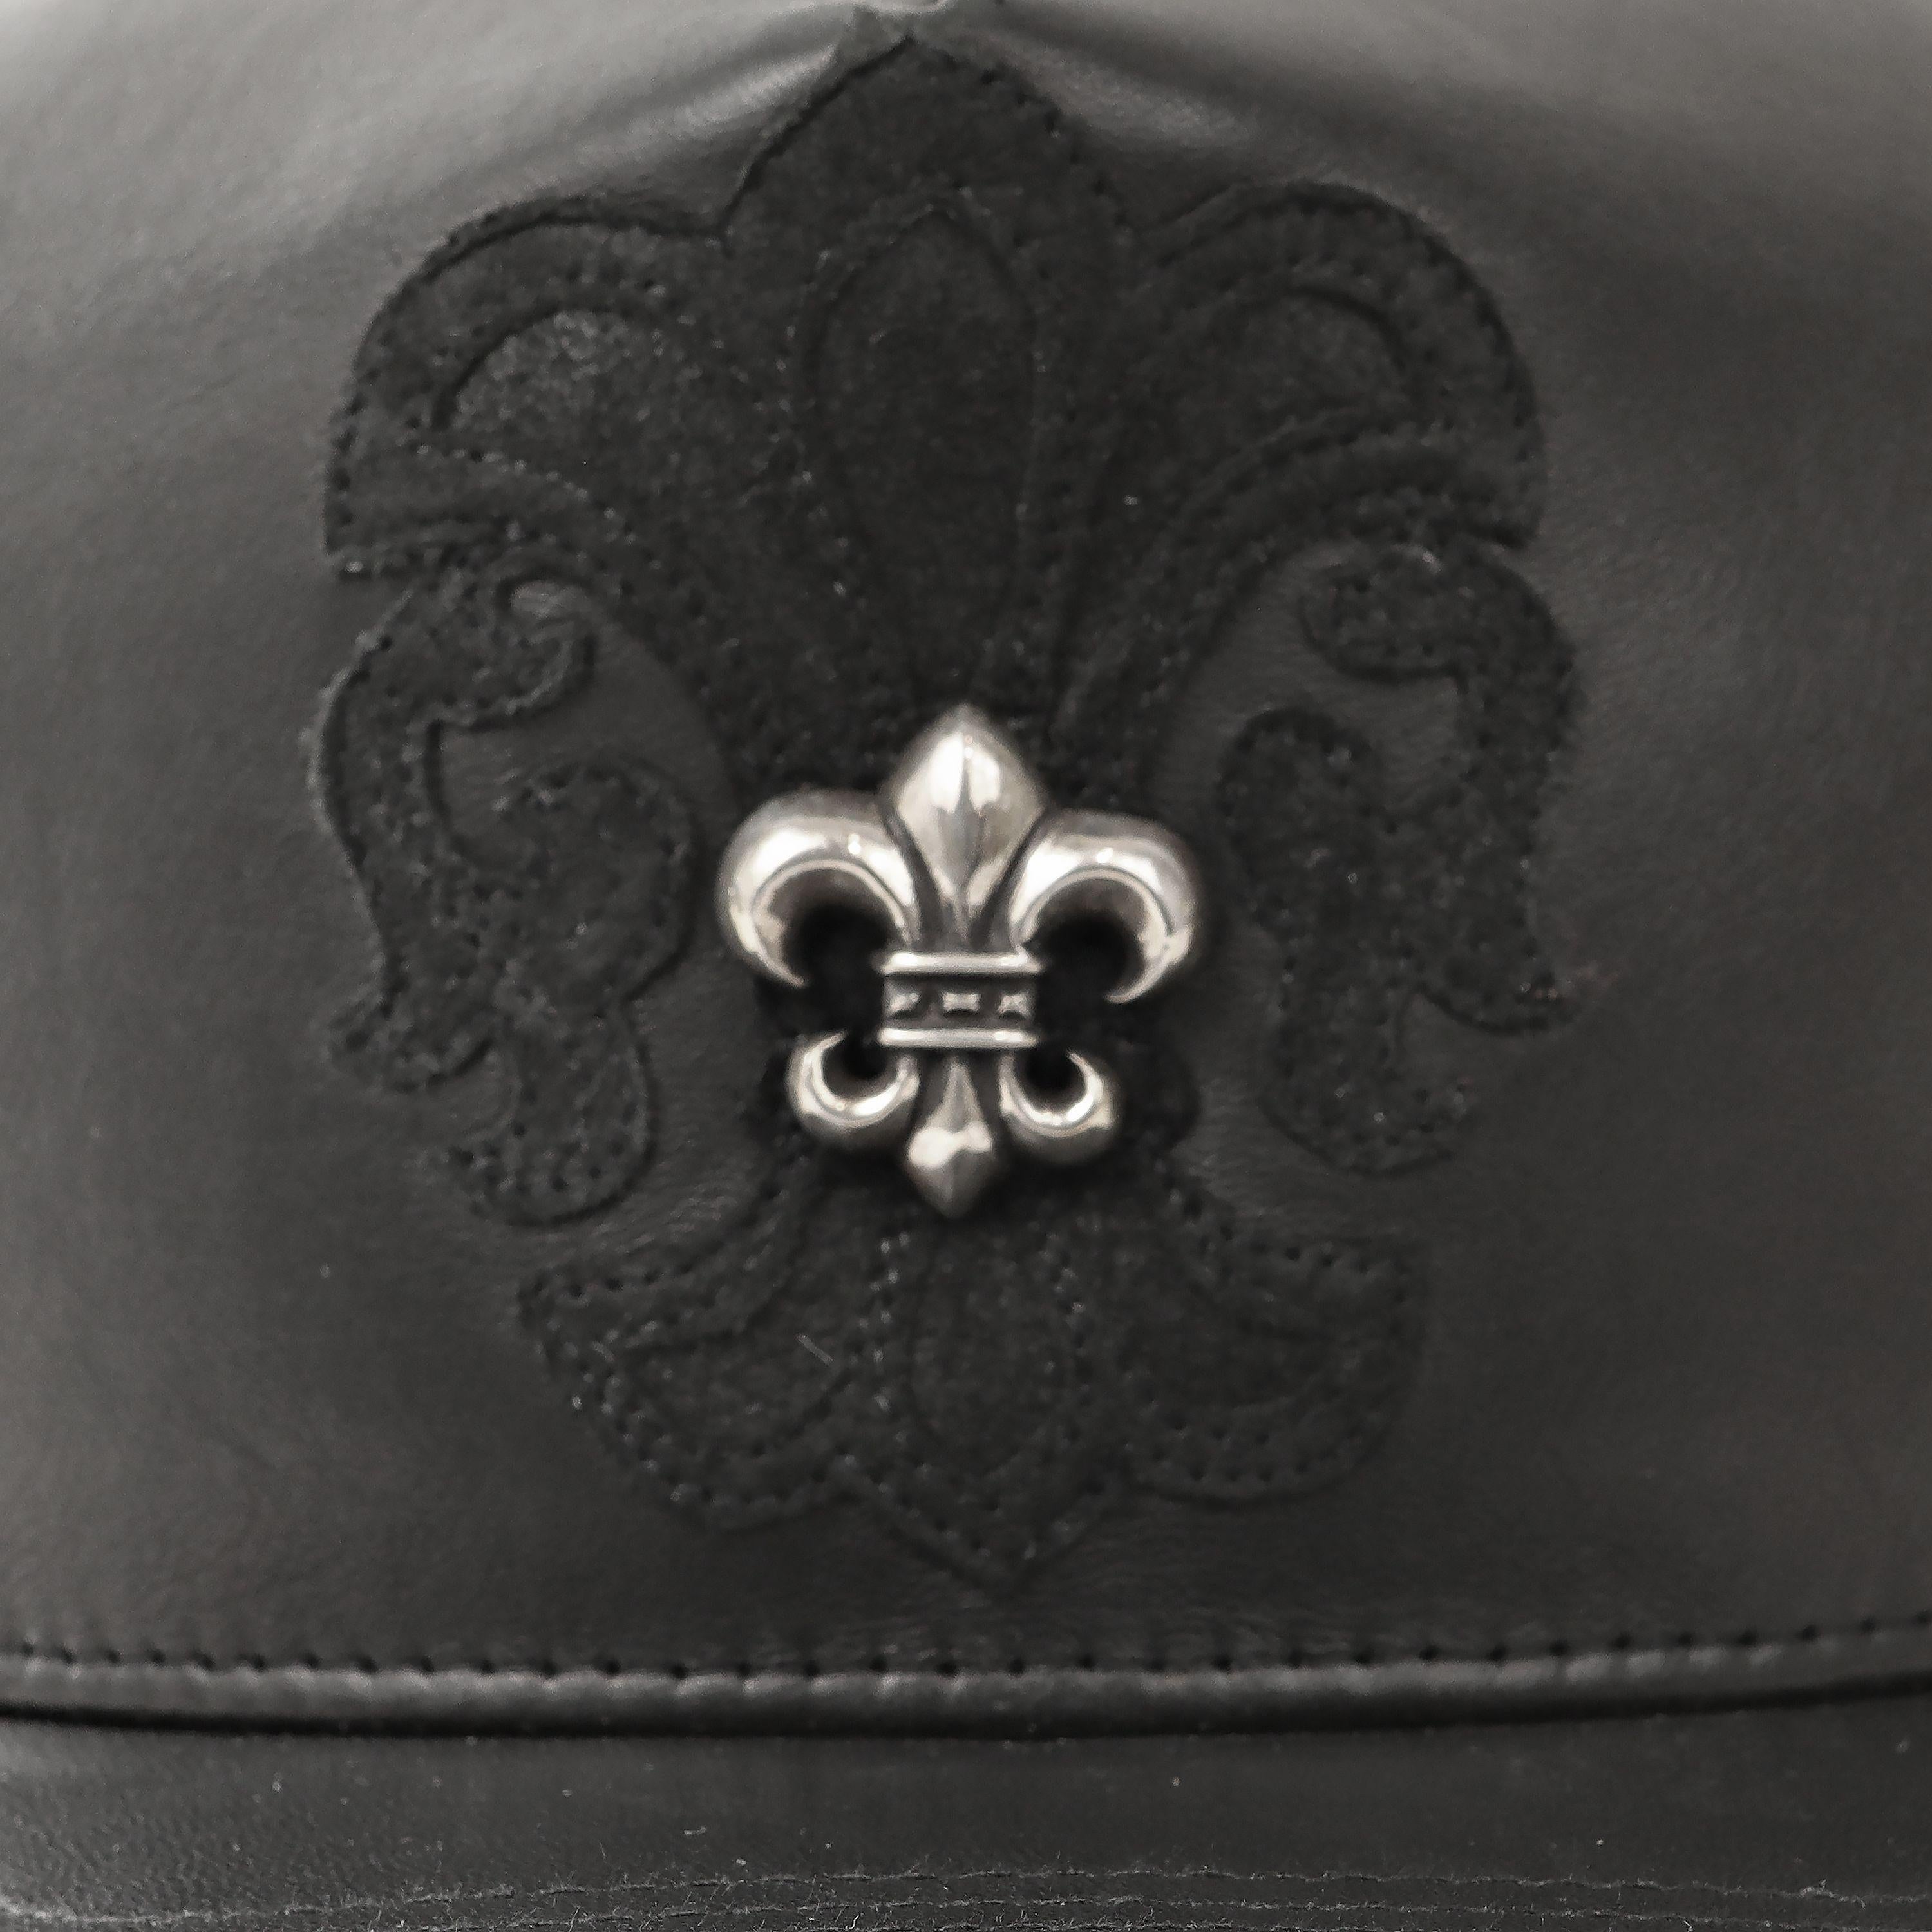 This authentic Chrome Hearts Black Leather Fleur de Lis Hat is in pristine unworn condition.  Black leather trucker style hat with black embroidery and silver Fleur De Lis.    

PBF 14050